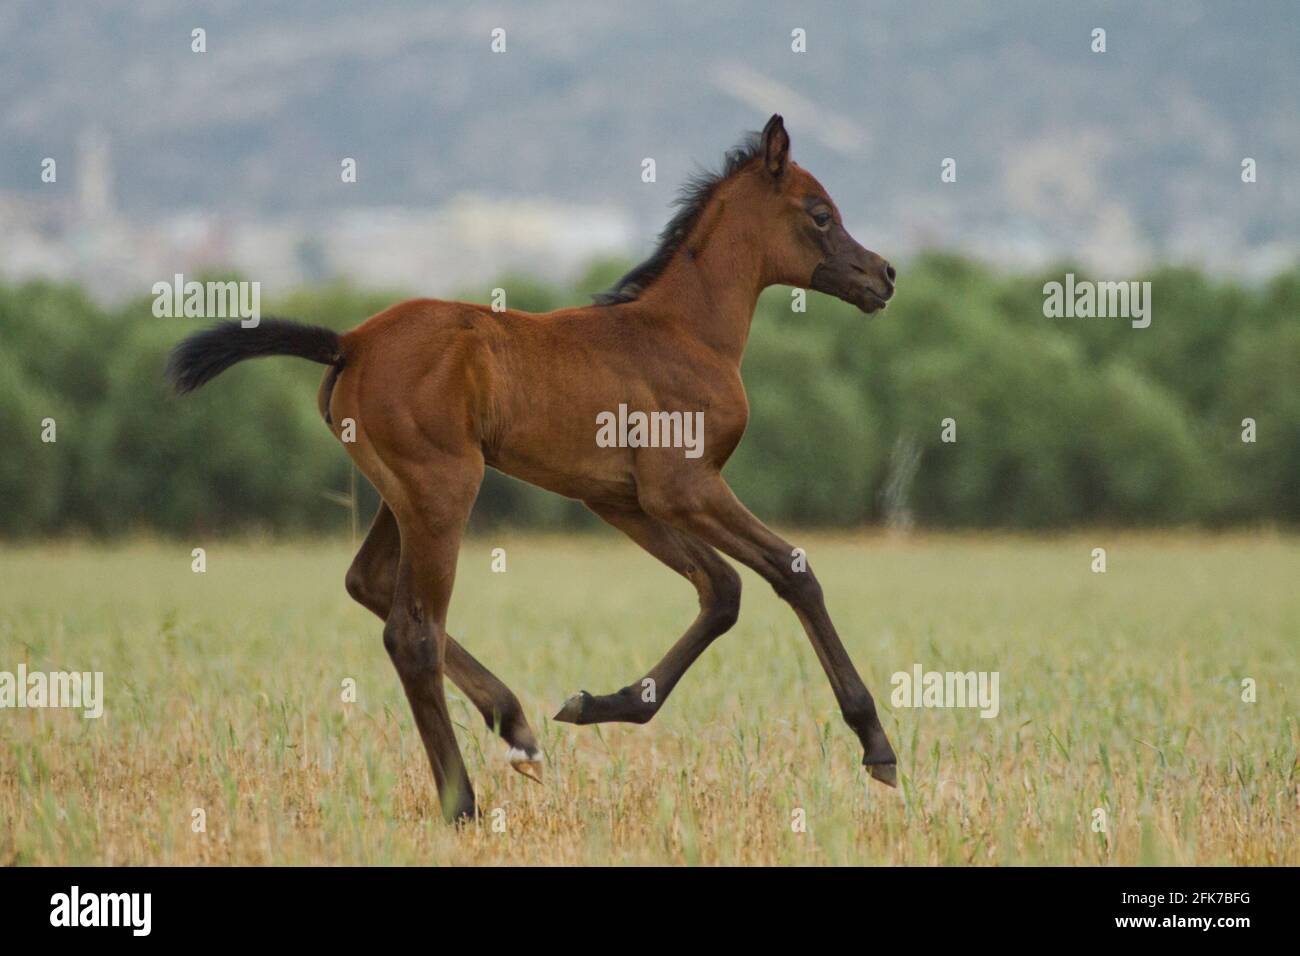 Chestnut Arabian Foal The Arabian or Arab horse is a breed of horse that originated on the Arabian Peninsula. With a distinctive head shape and high t Stock Photo